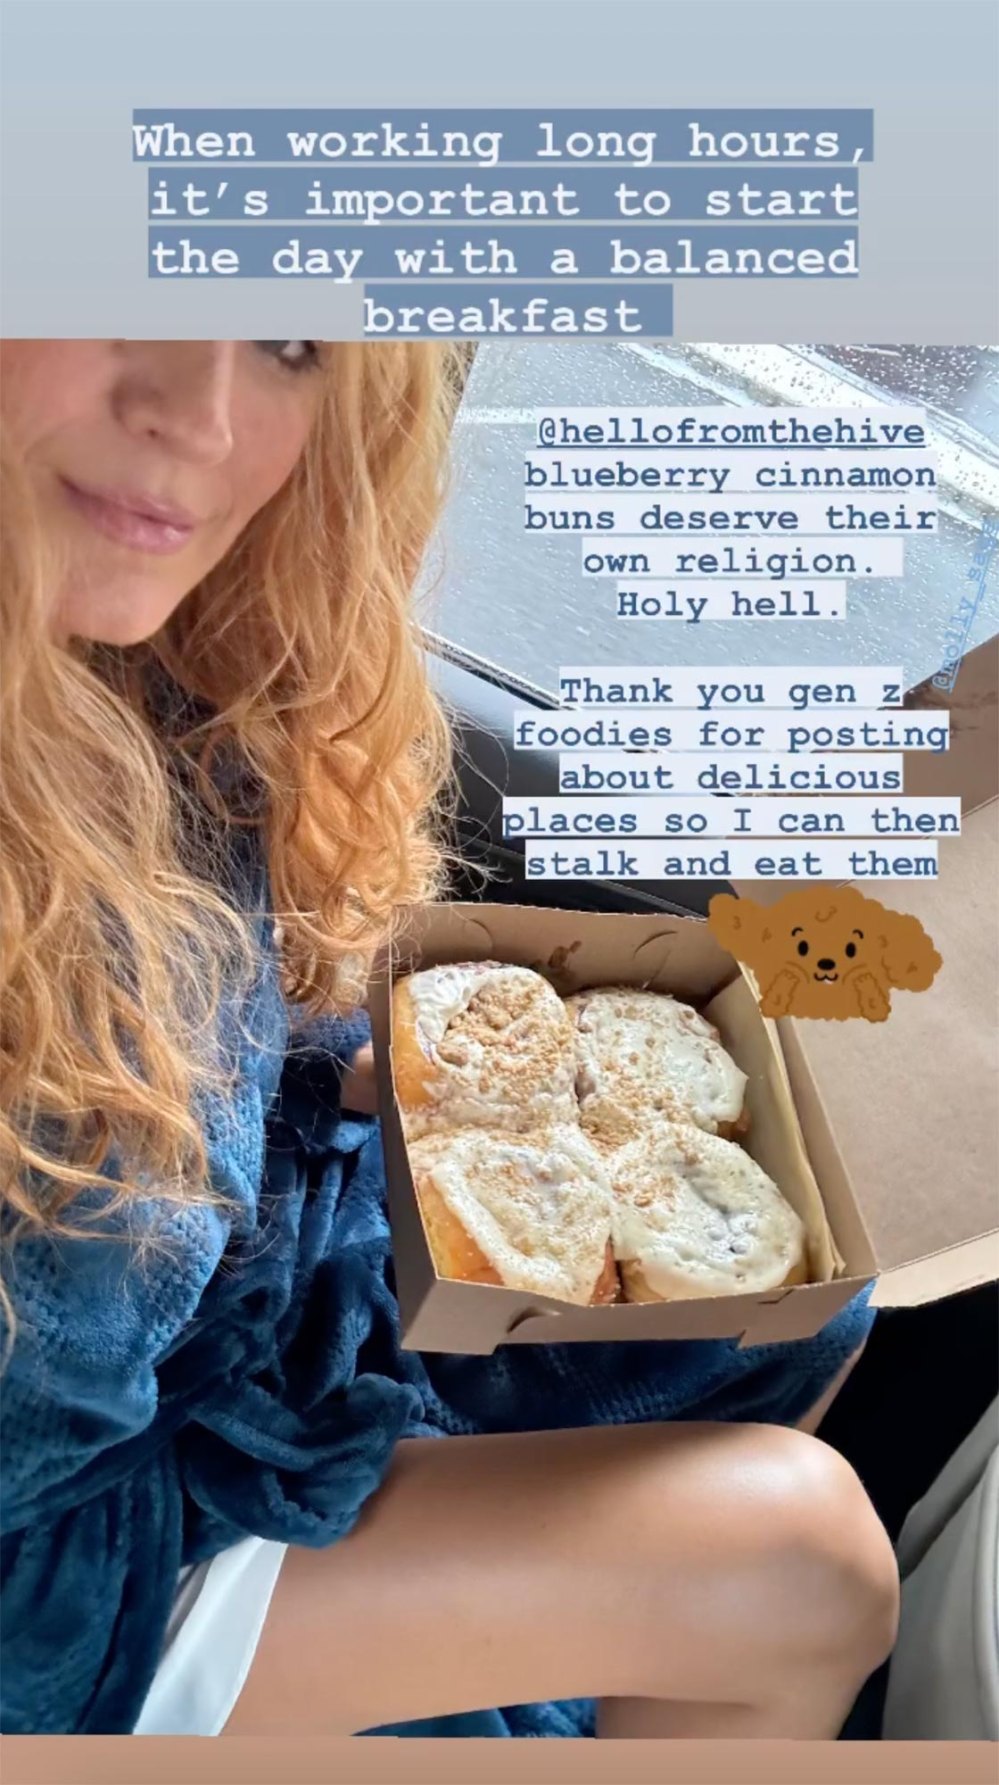 Blake Lively Jokes About Her Balanced Breakfast of Blueberry Cinnamon Buns